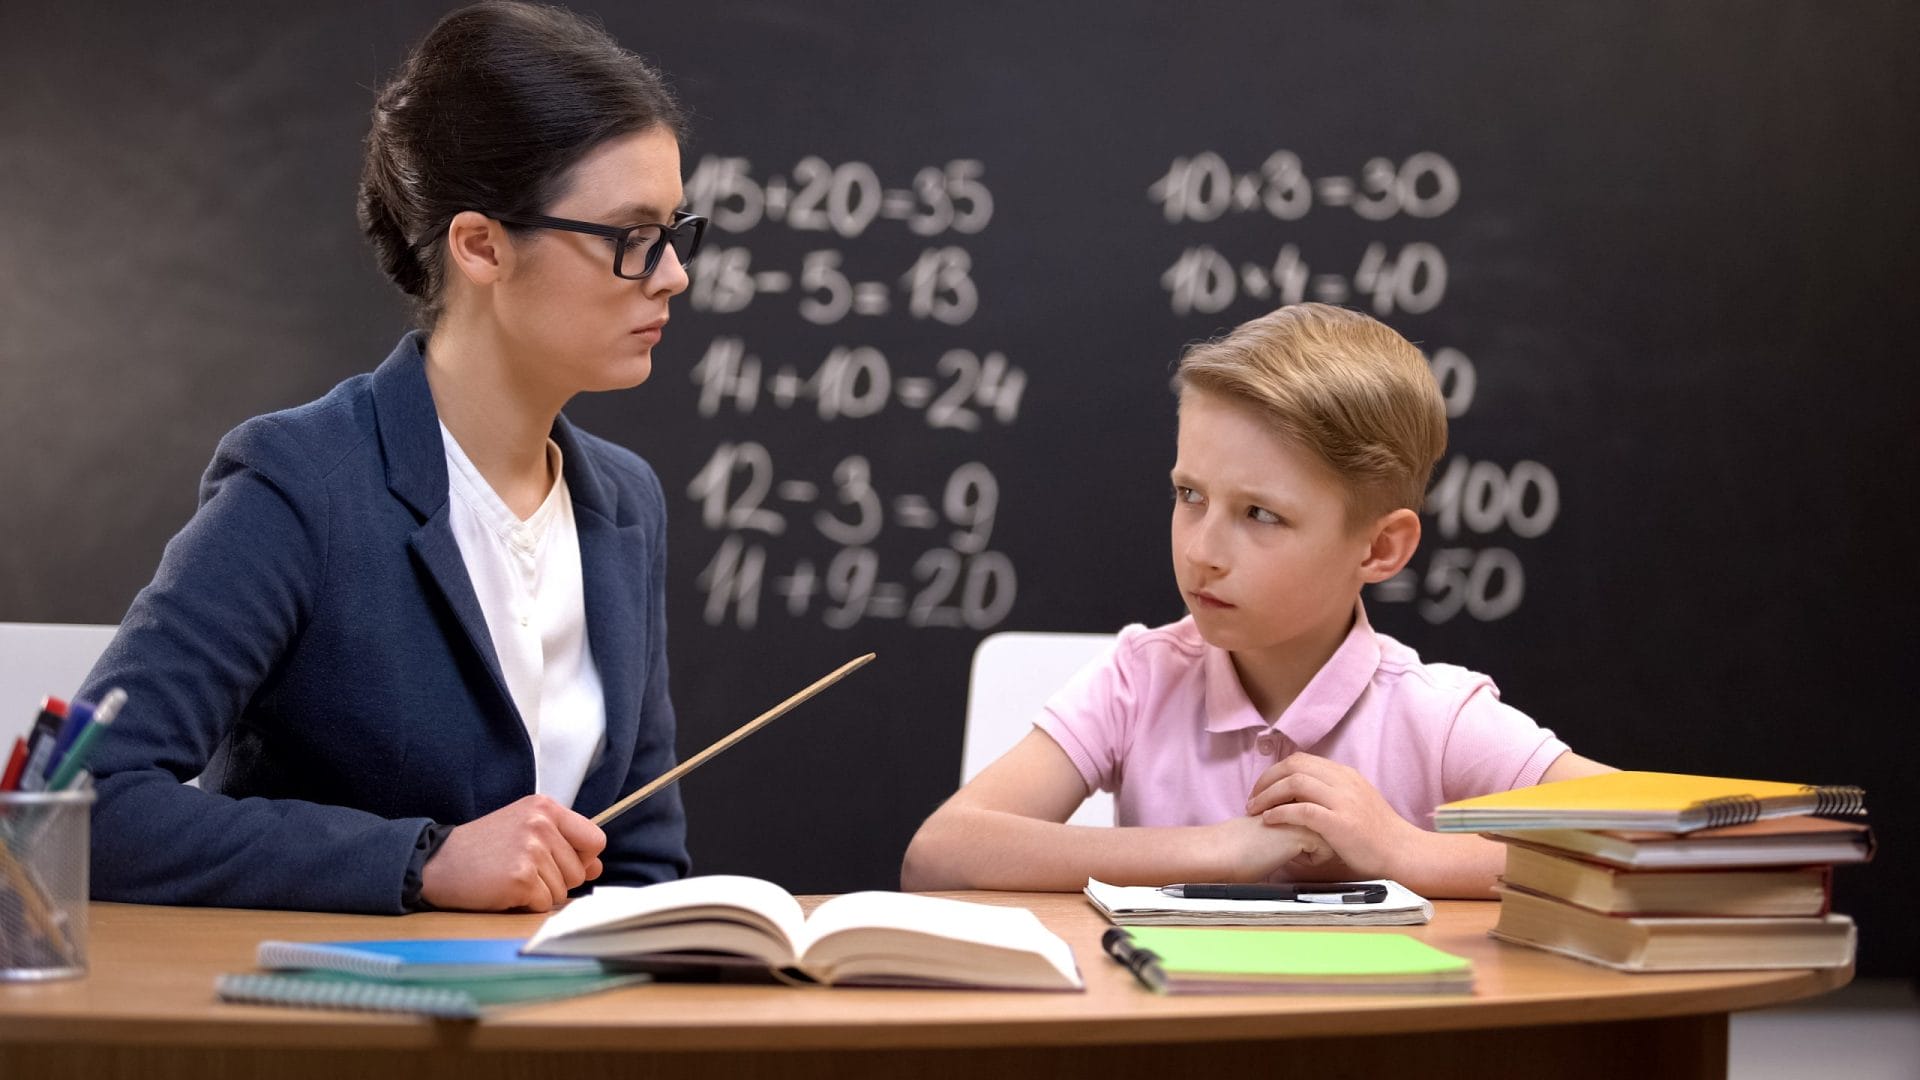 Schoolboy looking cautiously at teacher